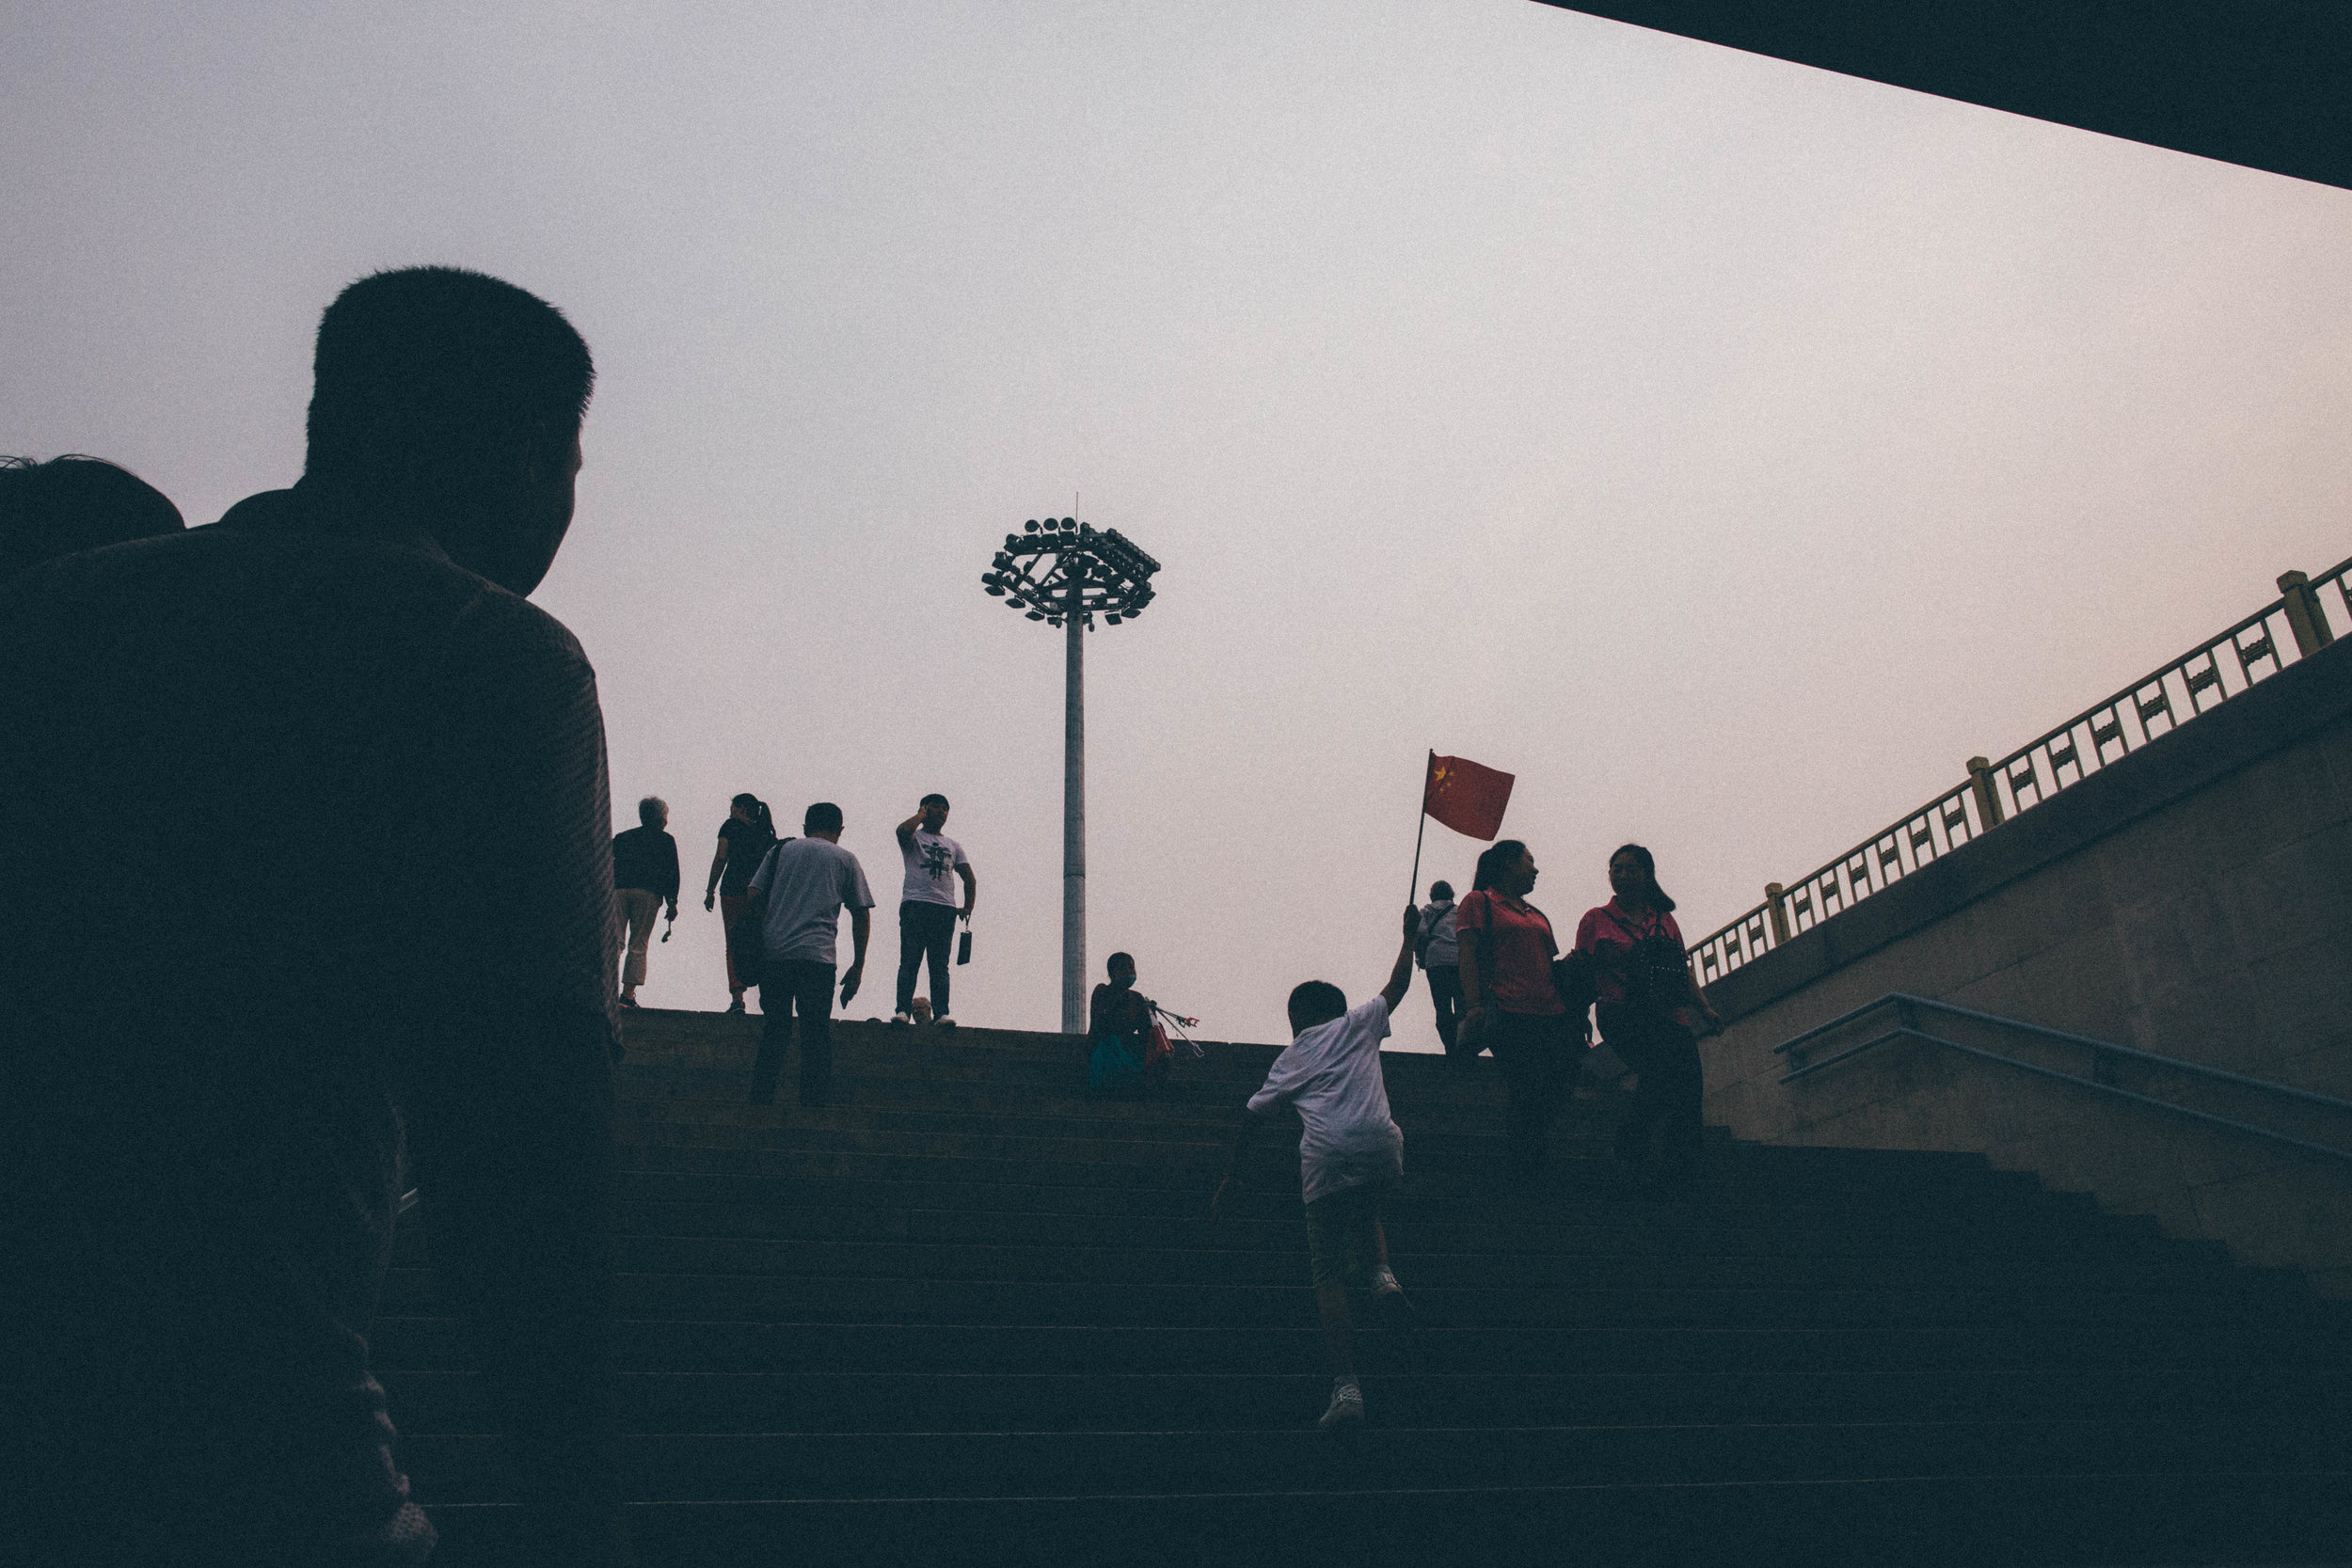   A young boy runs up the stairs to Tiananmen square waving the flag of the People's Republic of China. Beijing, China.&nbsp;  